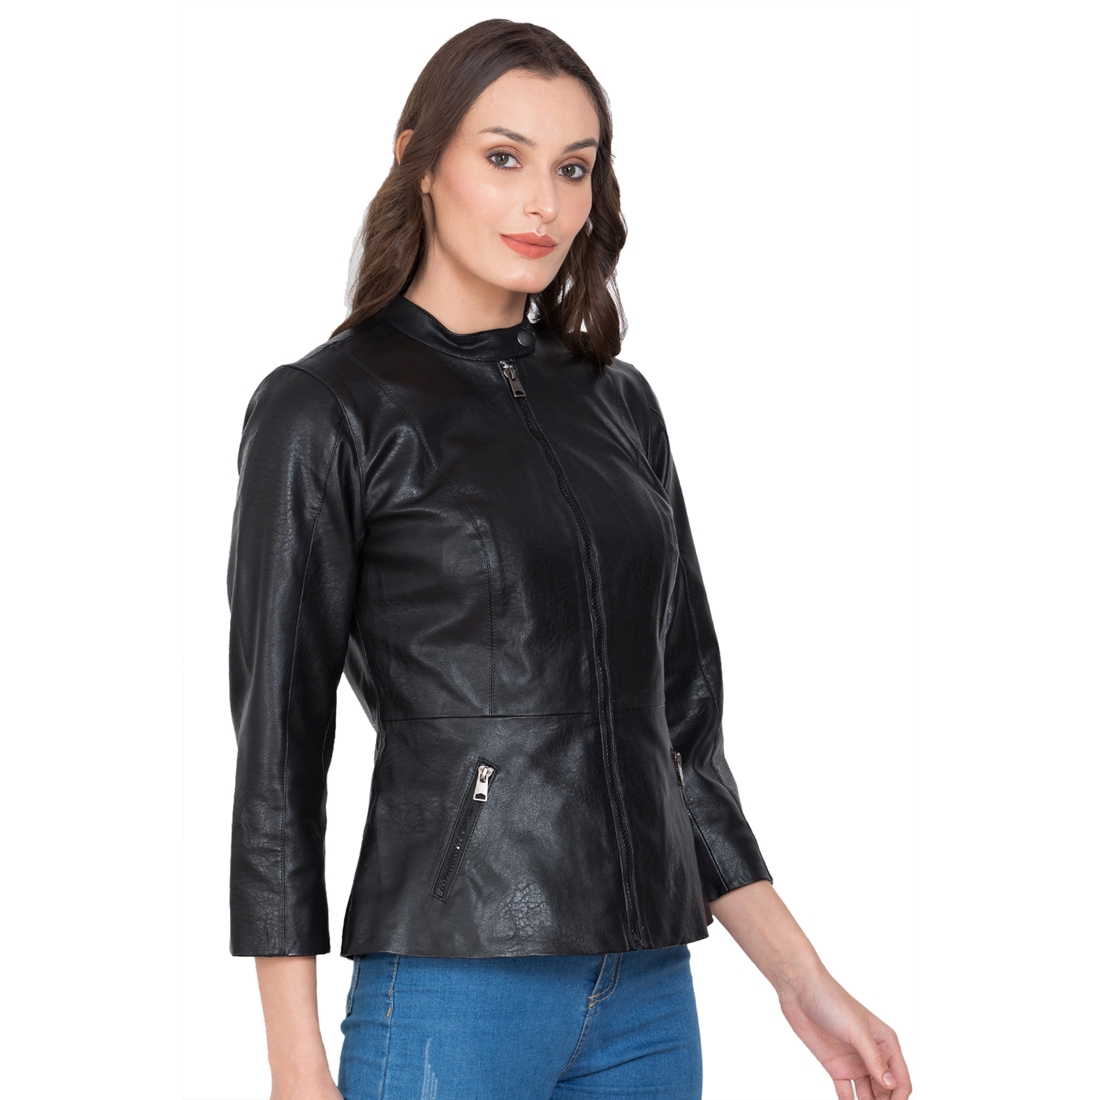 Justanned | JUSTANNED RAVEN WOMEN LEATHER JACKET 3